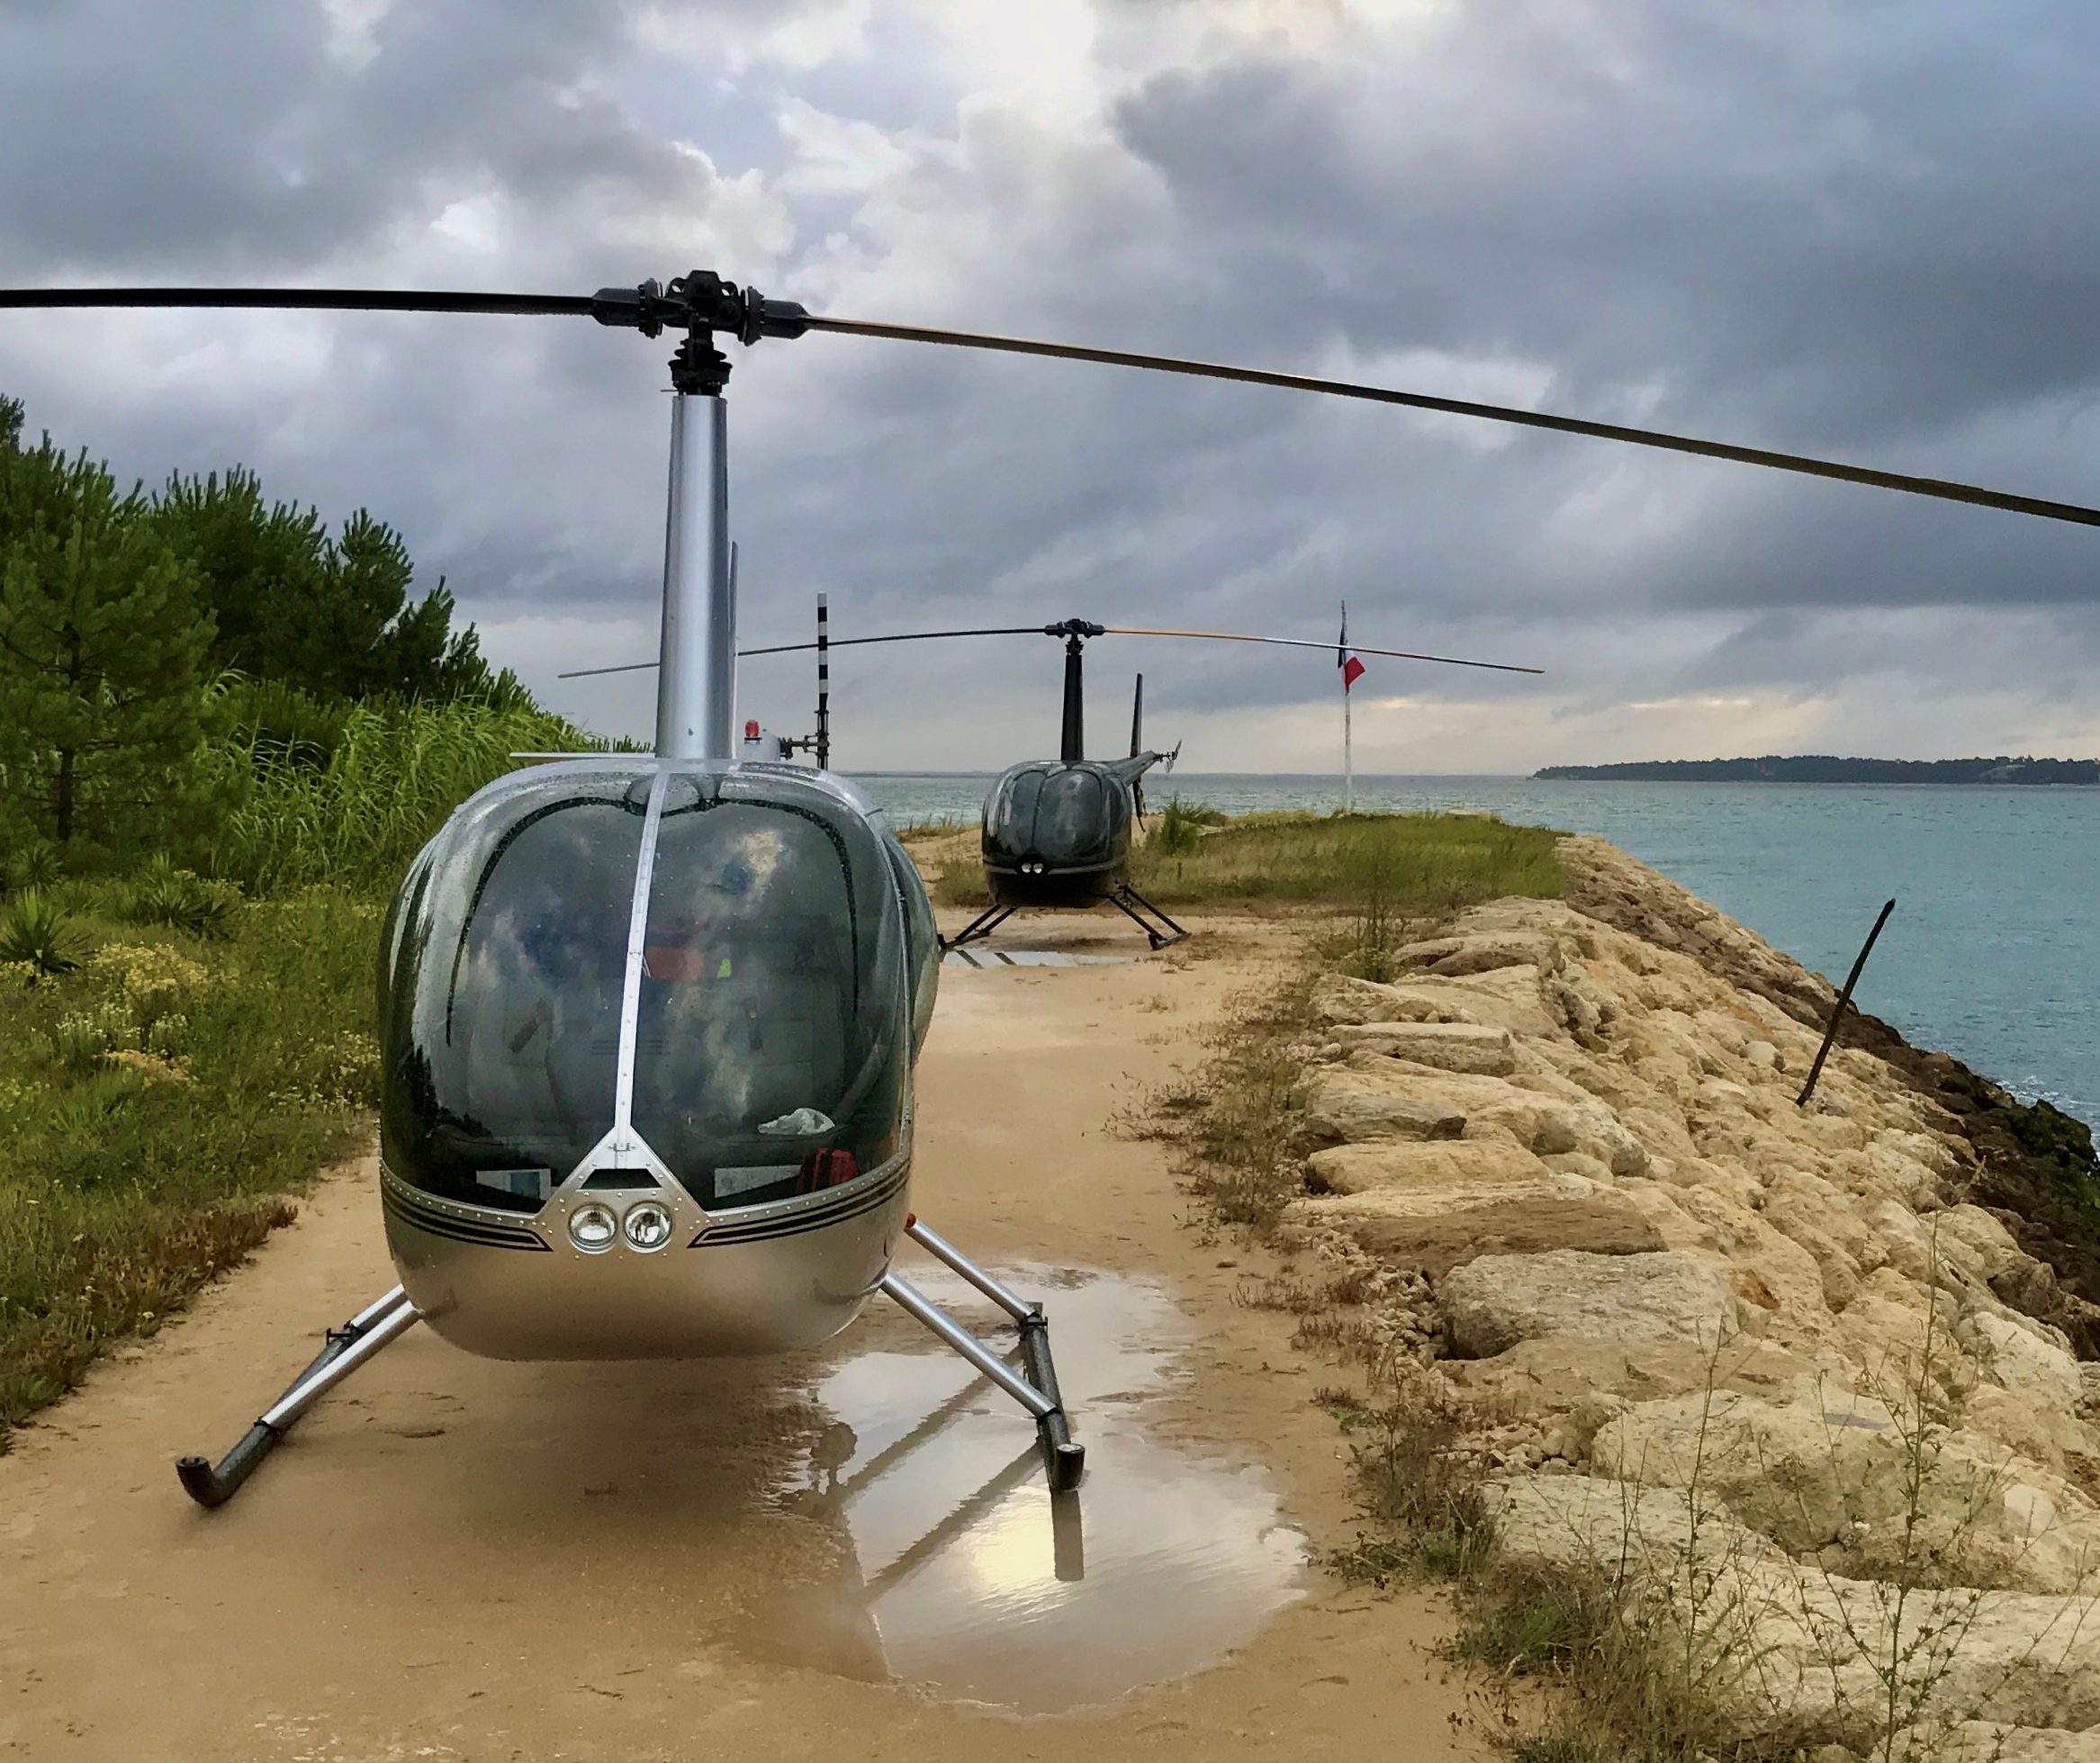 2 x Robinson R44 helicopters landing on a narrow strip of ground next to the sea